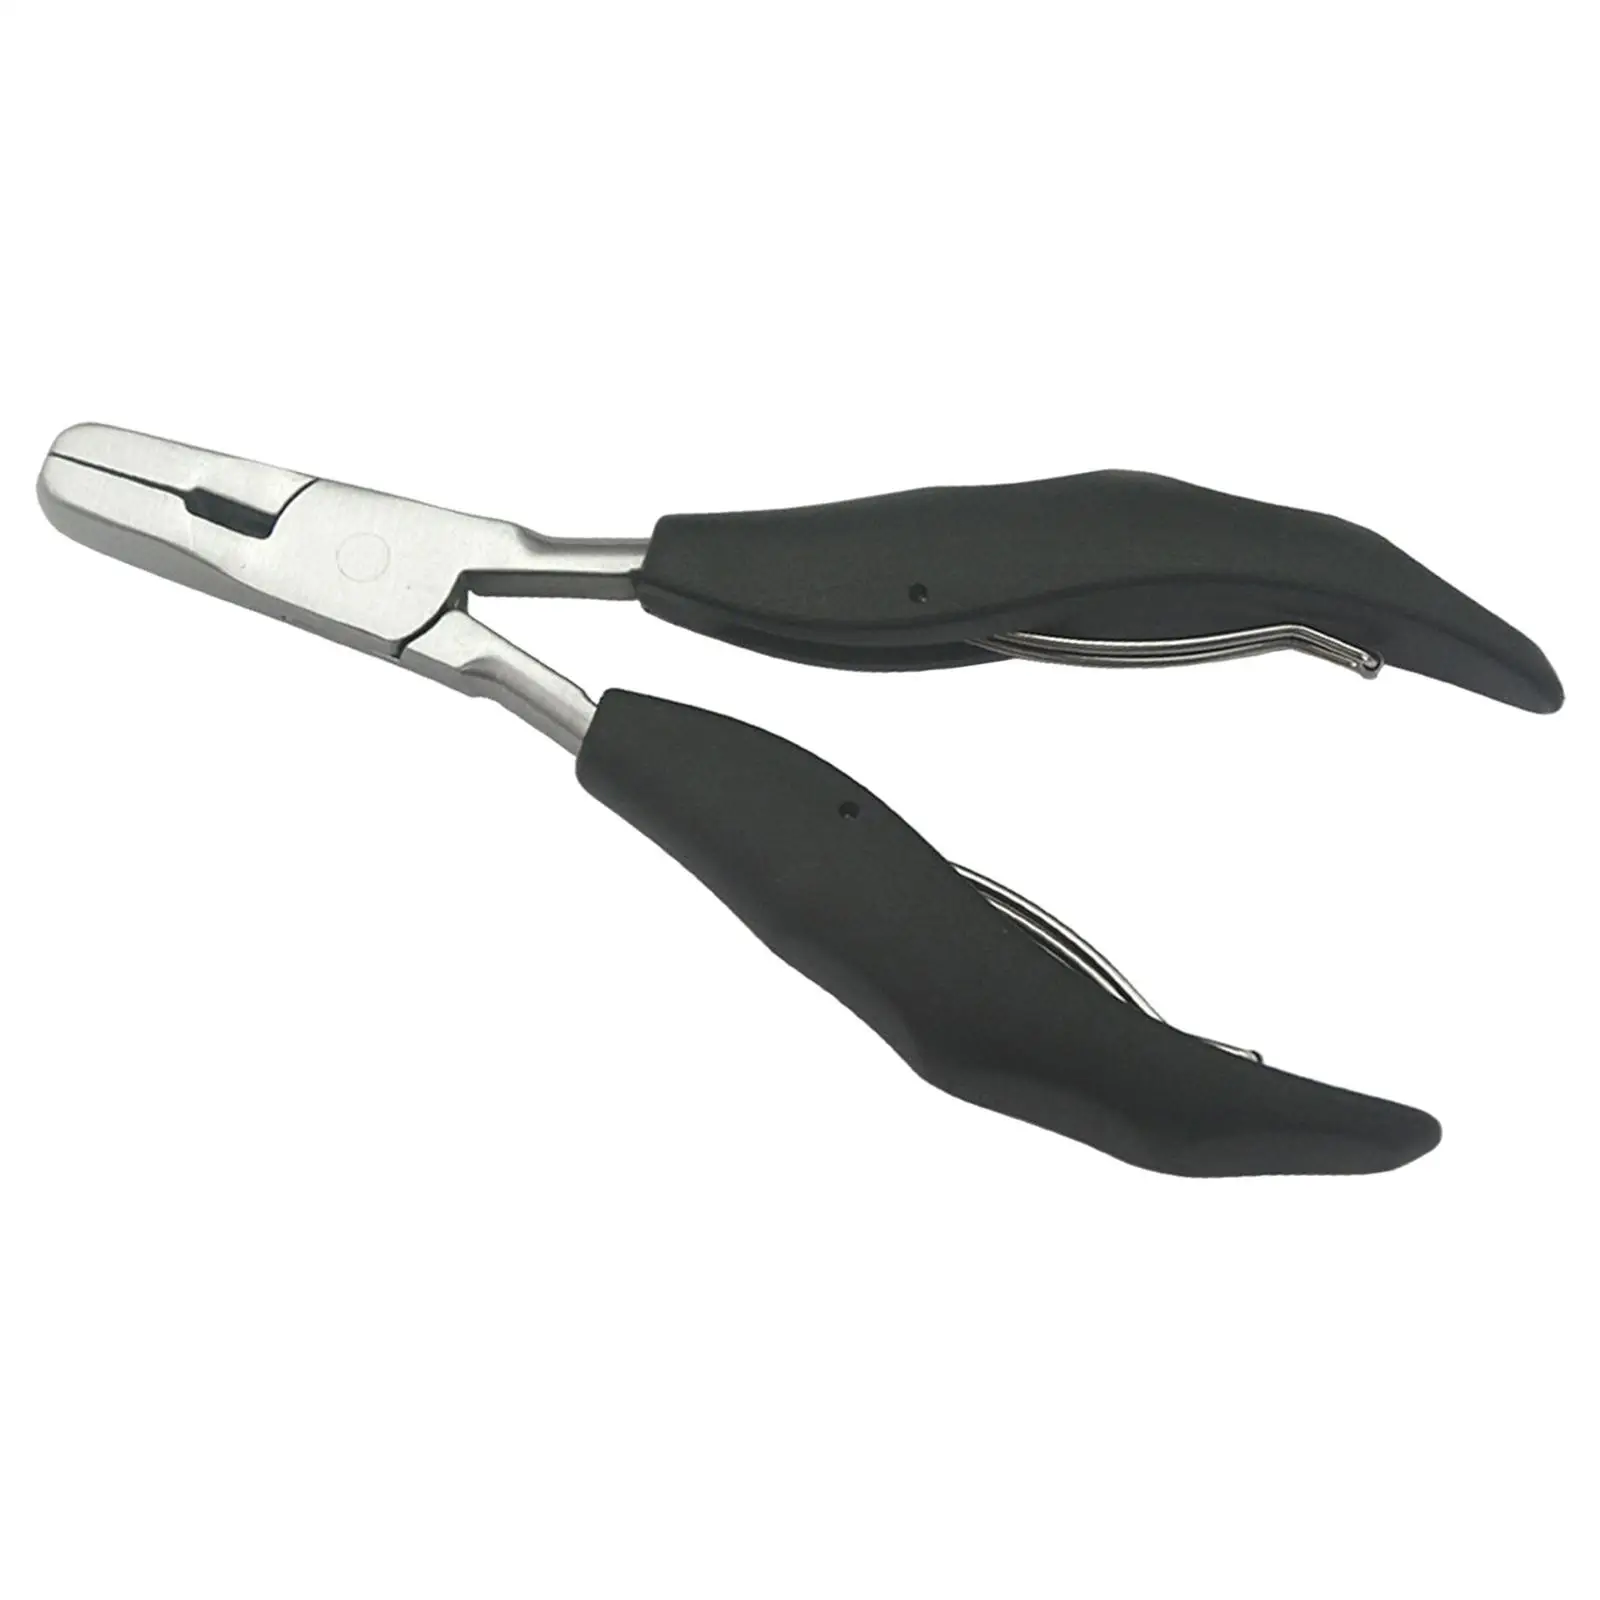 Hair Extensions Pliers Multifunction Premium Stainless Steel High Performance for